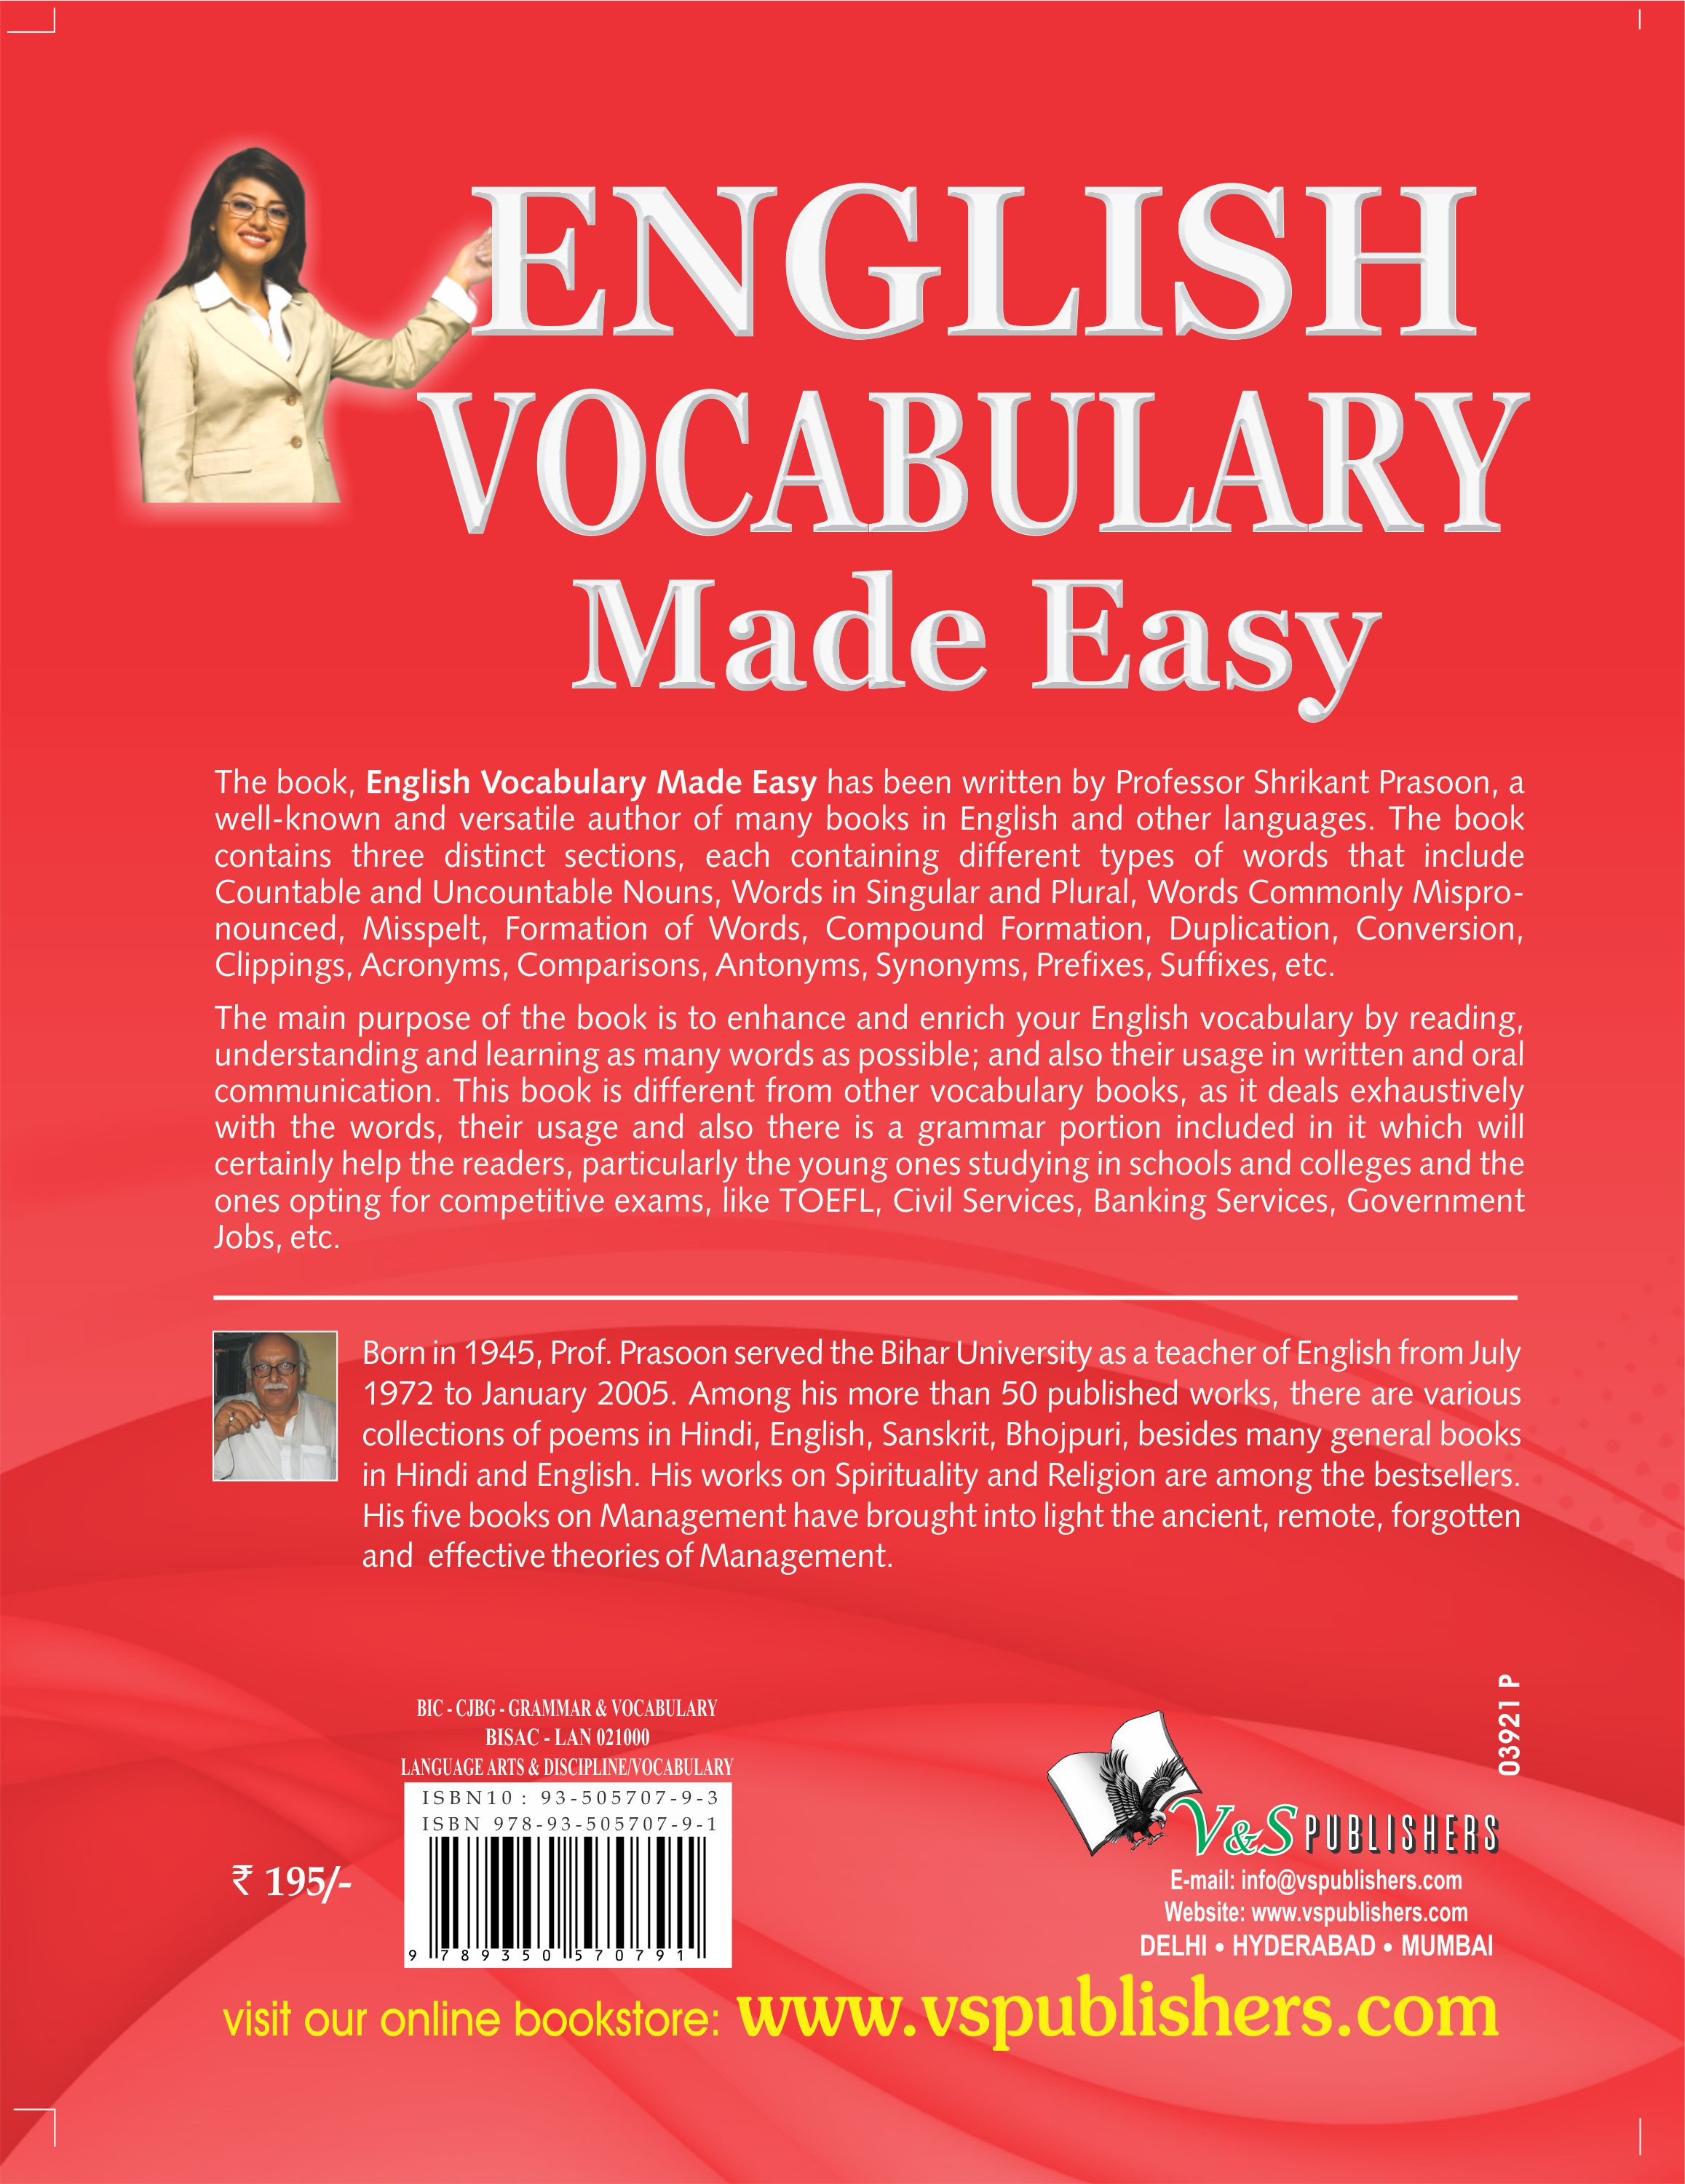 buy-english-vocabulary-made-easy-online-194-from-shopclues